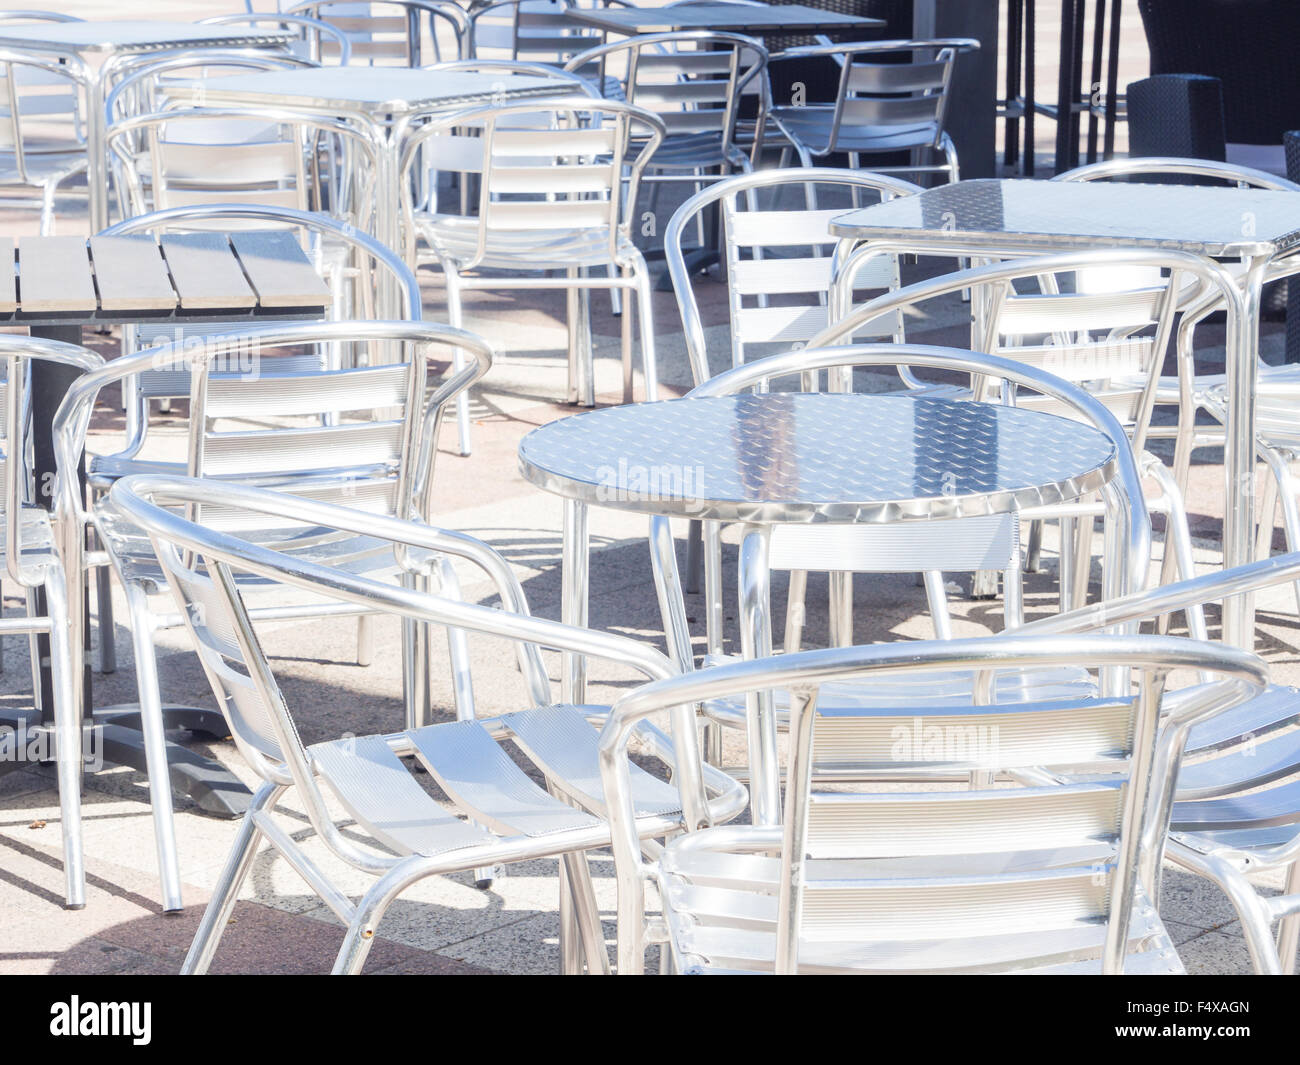 seats metallic reflection. several tables and metal chairs empty Stock Photo